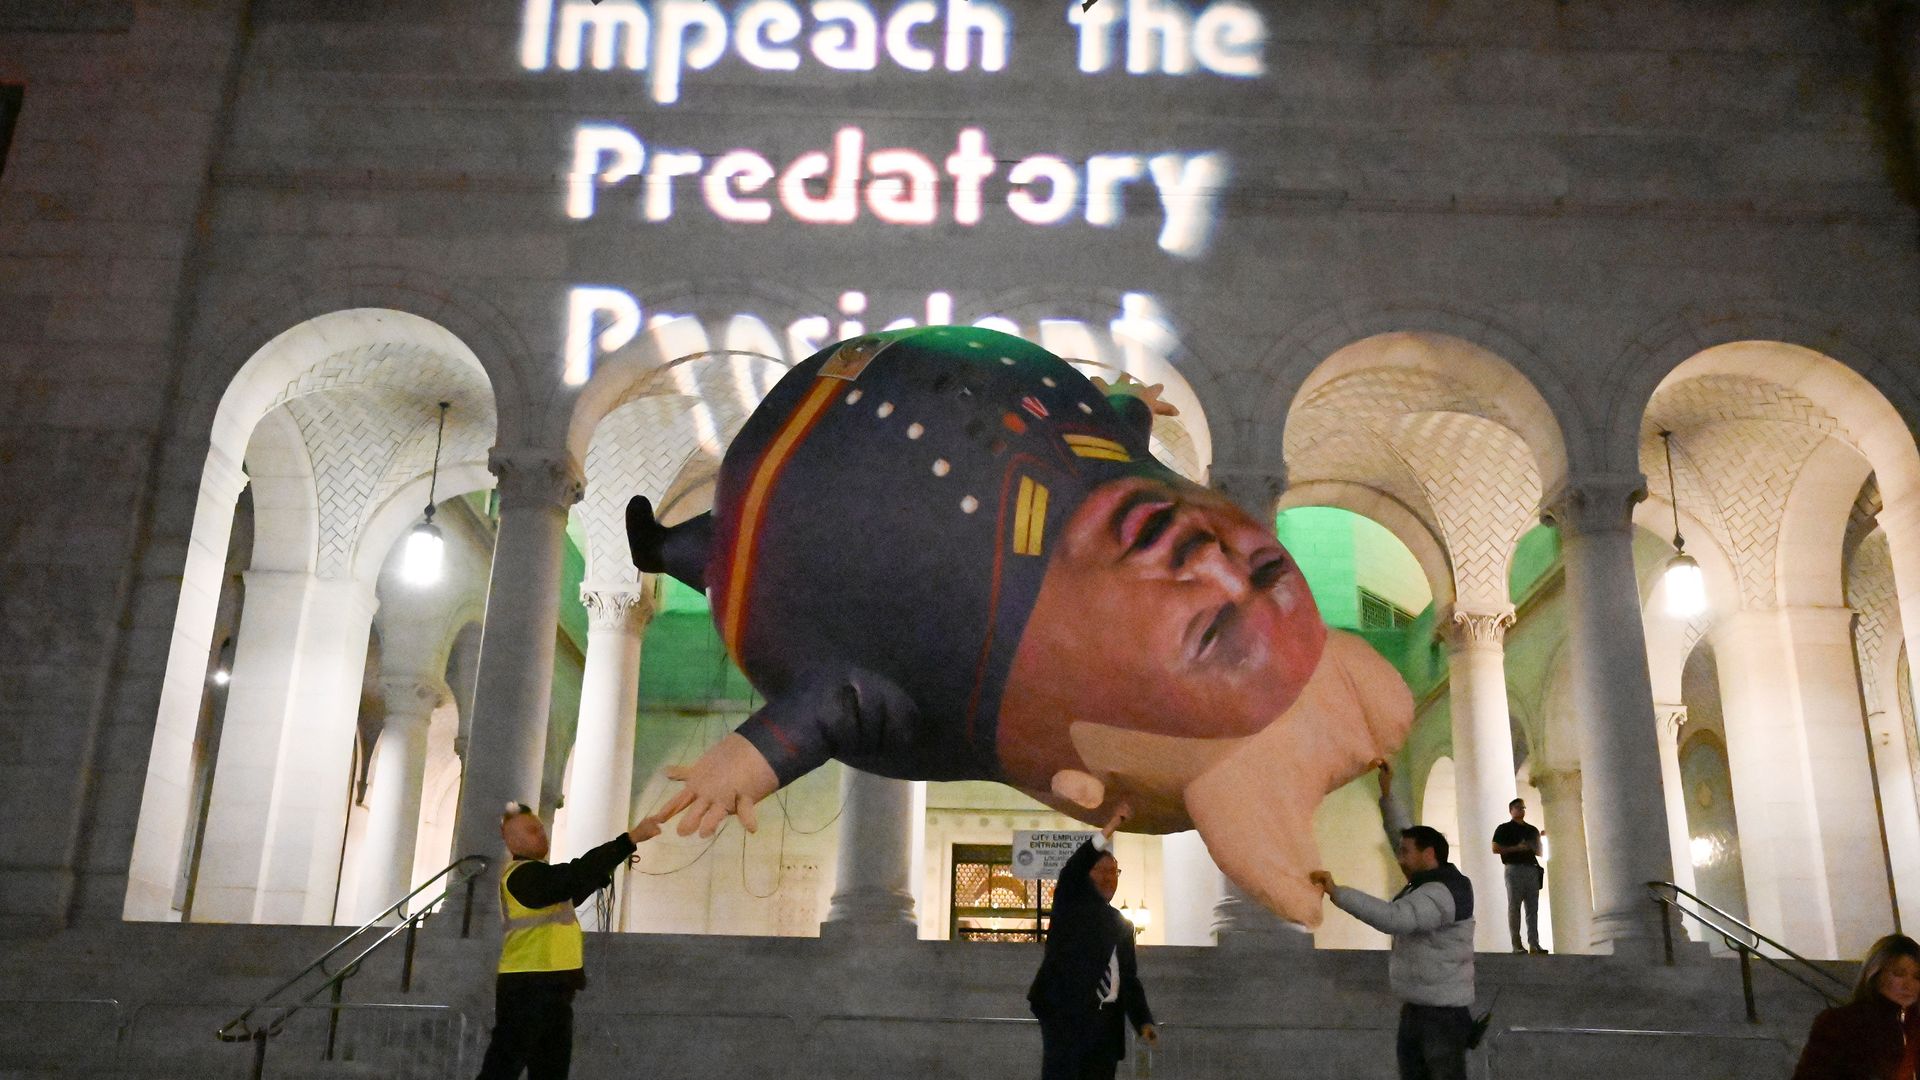 rotestors prepare to release a "Comrade Trump" balloon at a demonstration in support of his impeachment in downtown Los Angeles